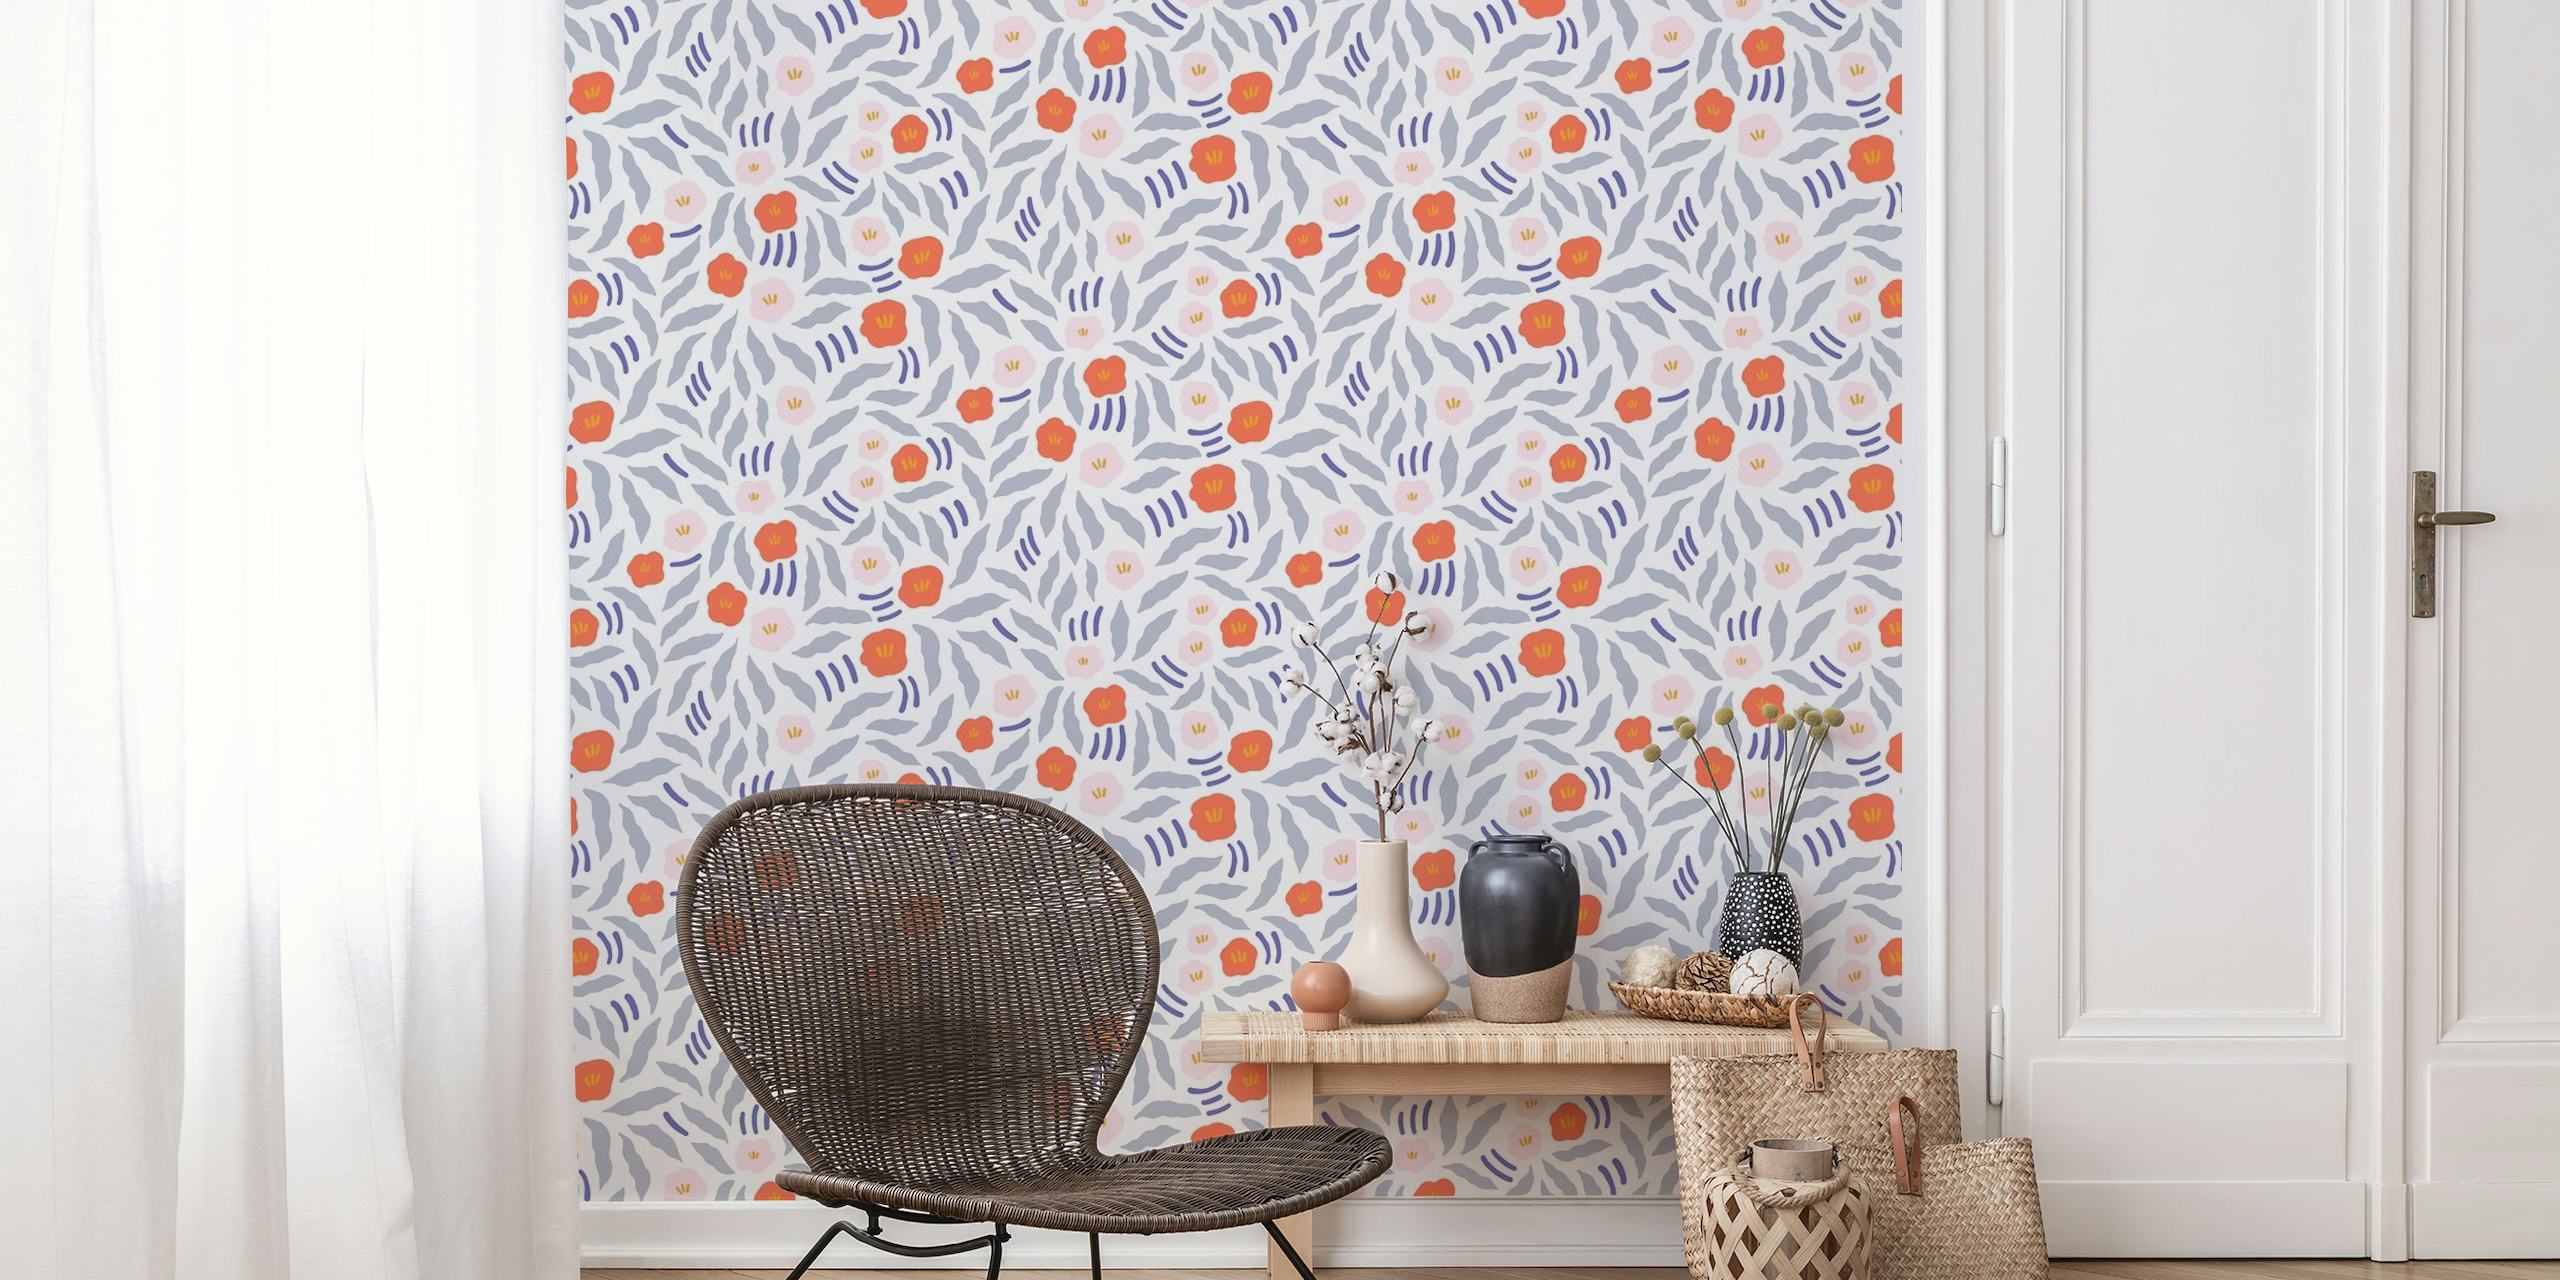 Artistic representation of 'Free Flow Flowers' wall mural with vibrant botanical patterns